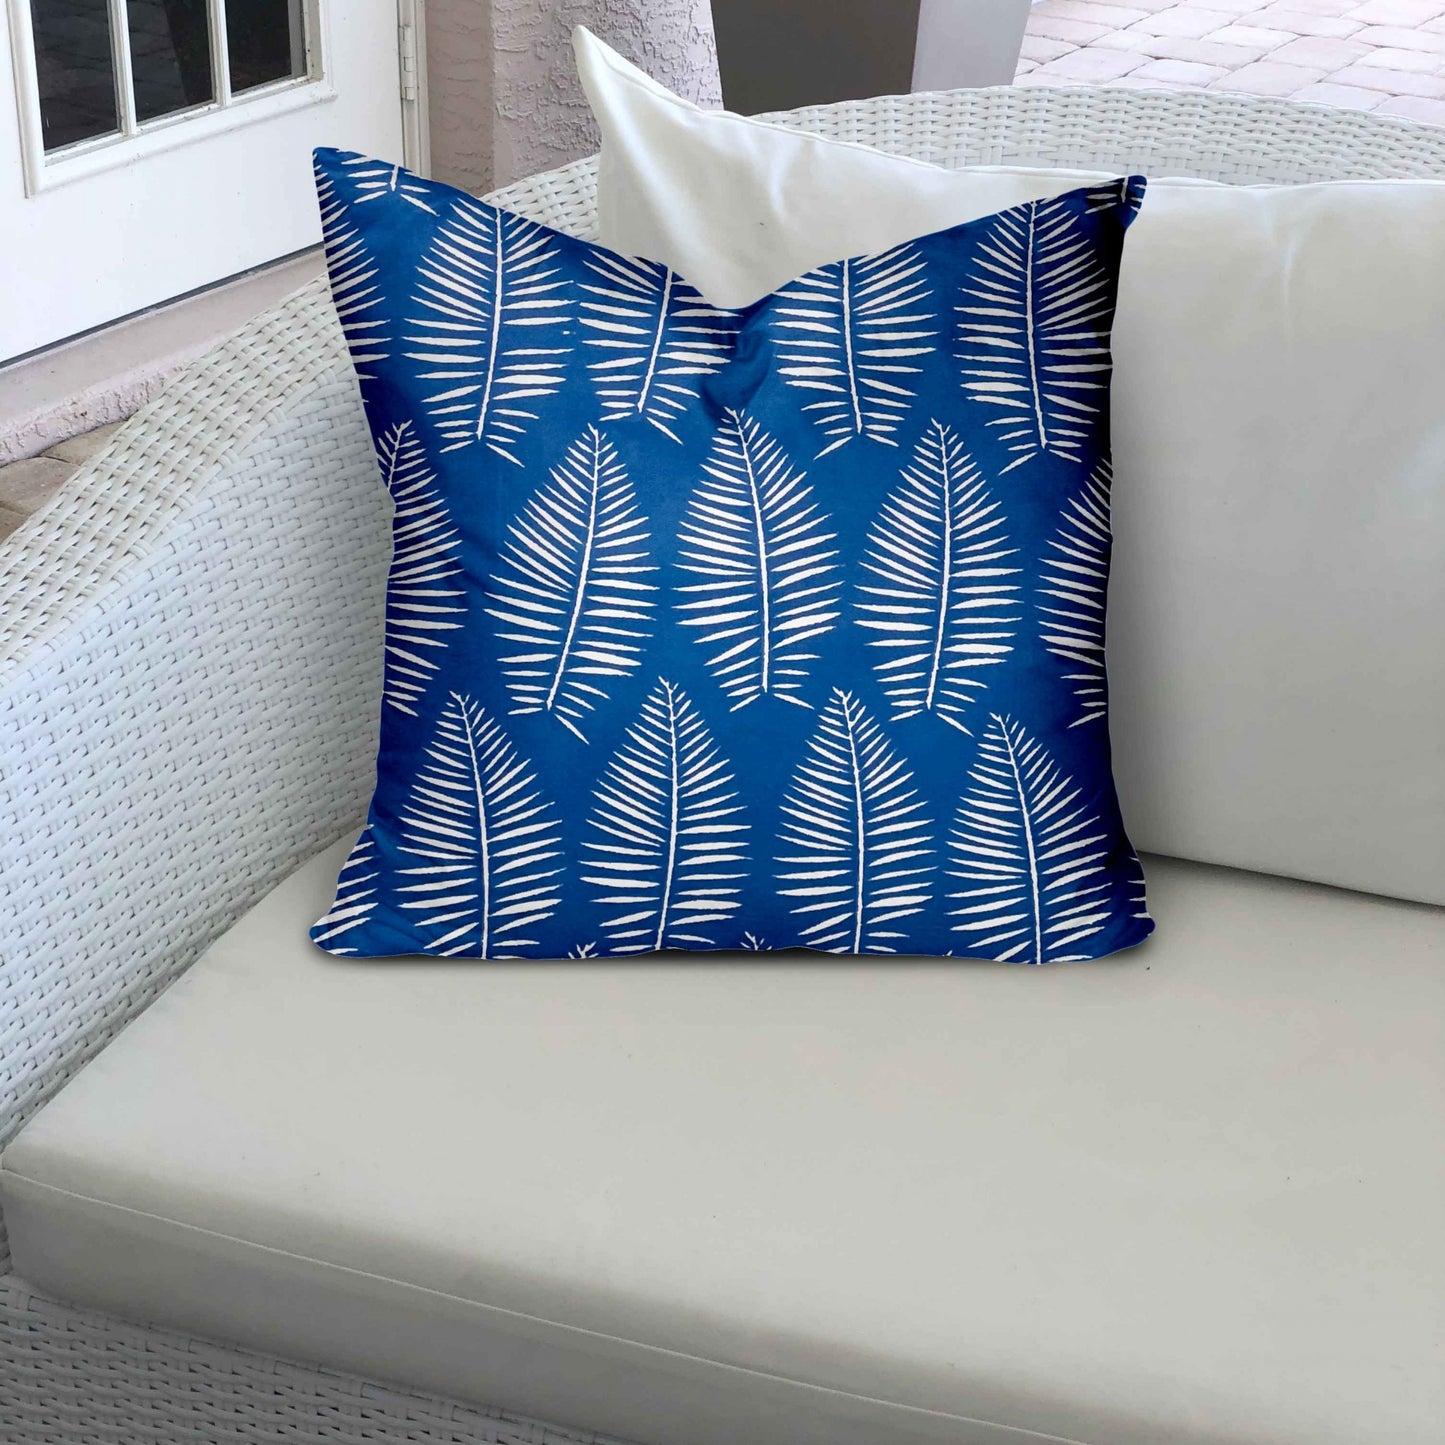 36" X 36" Blue And White Zippered Tropical Throw Indoor Outdoor Pillow Cover